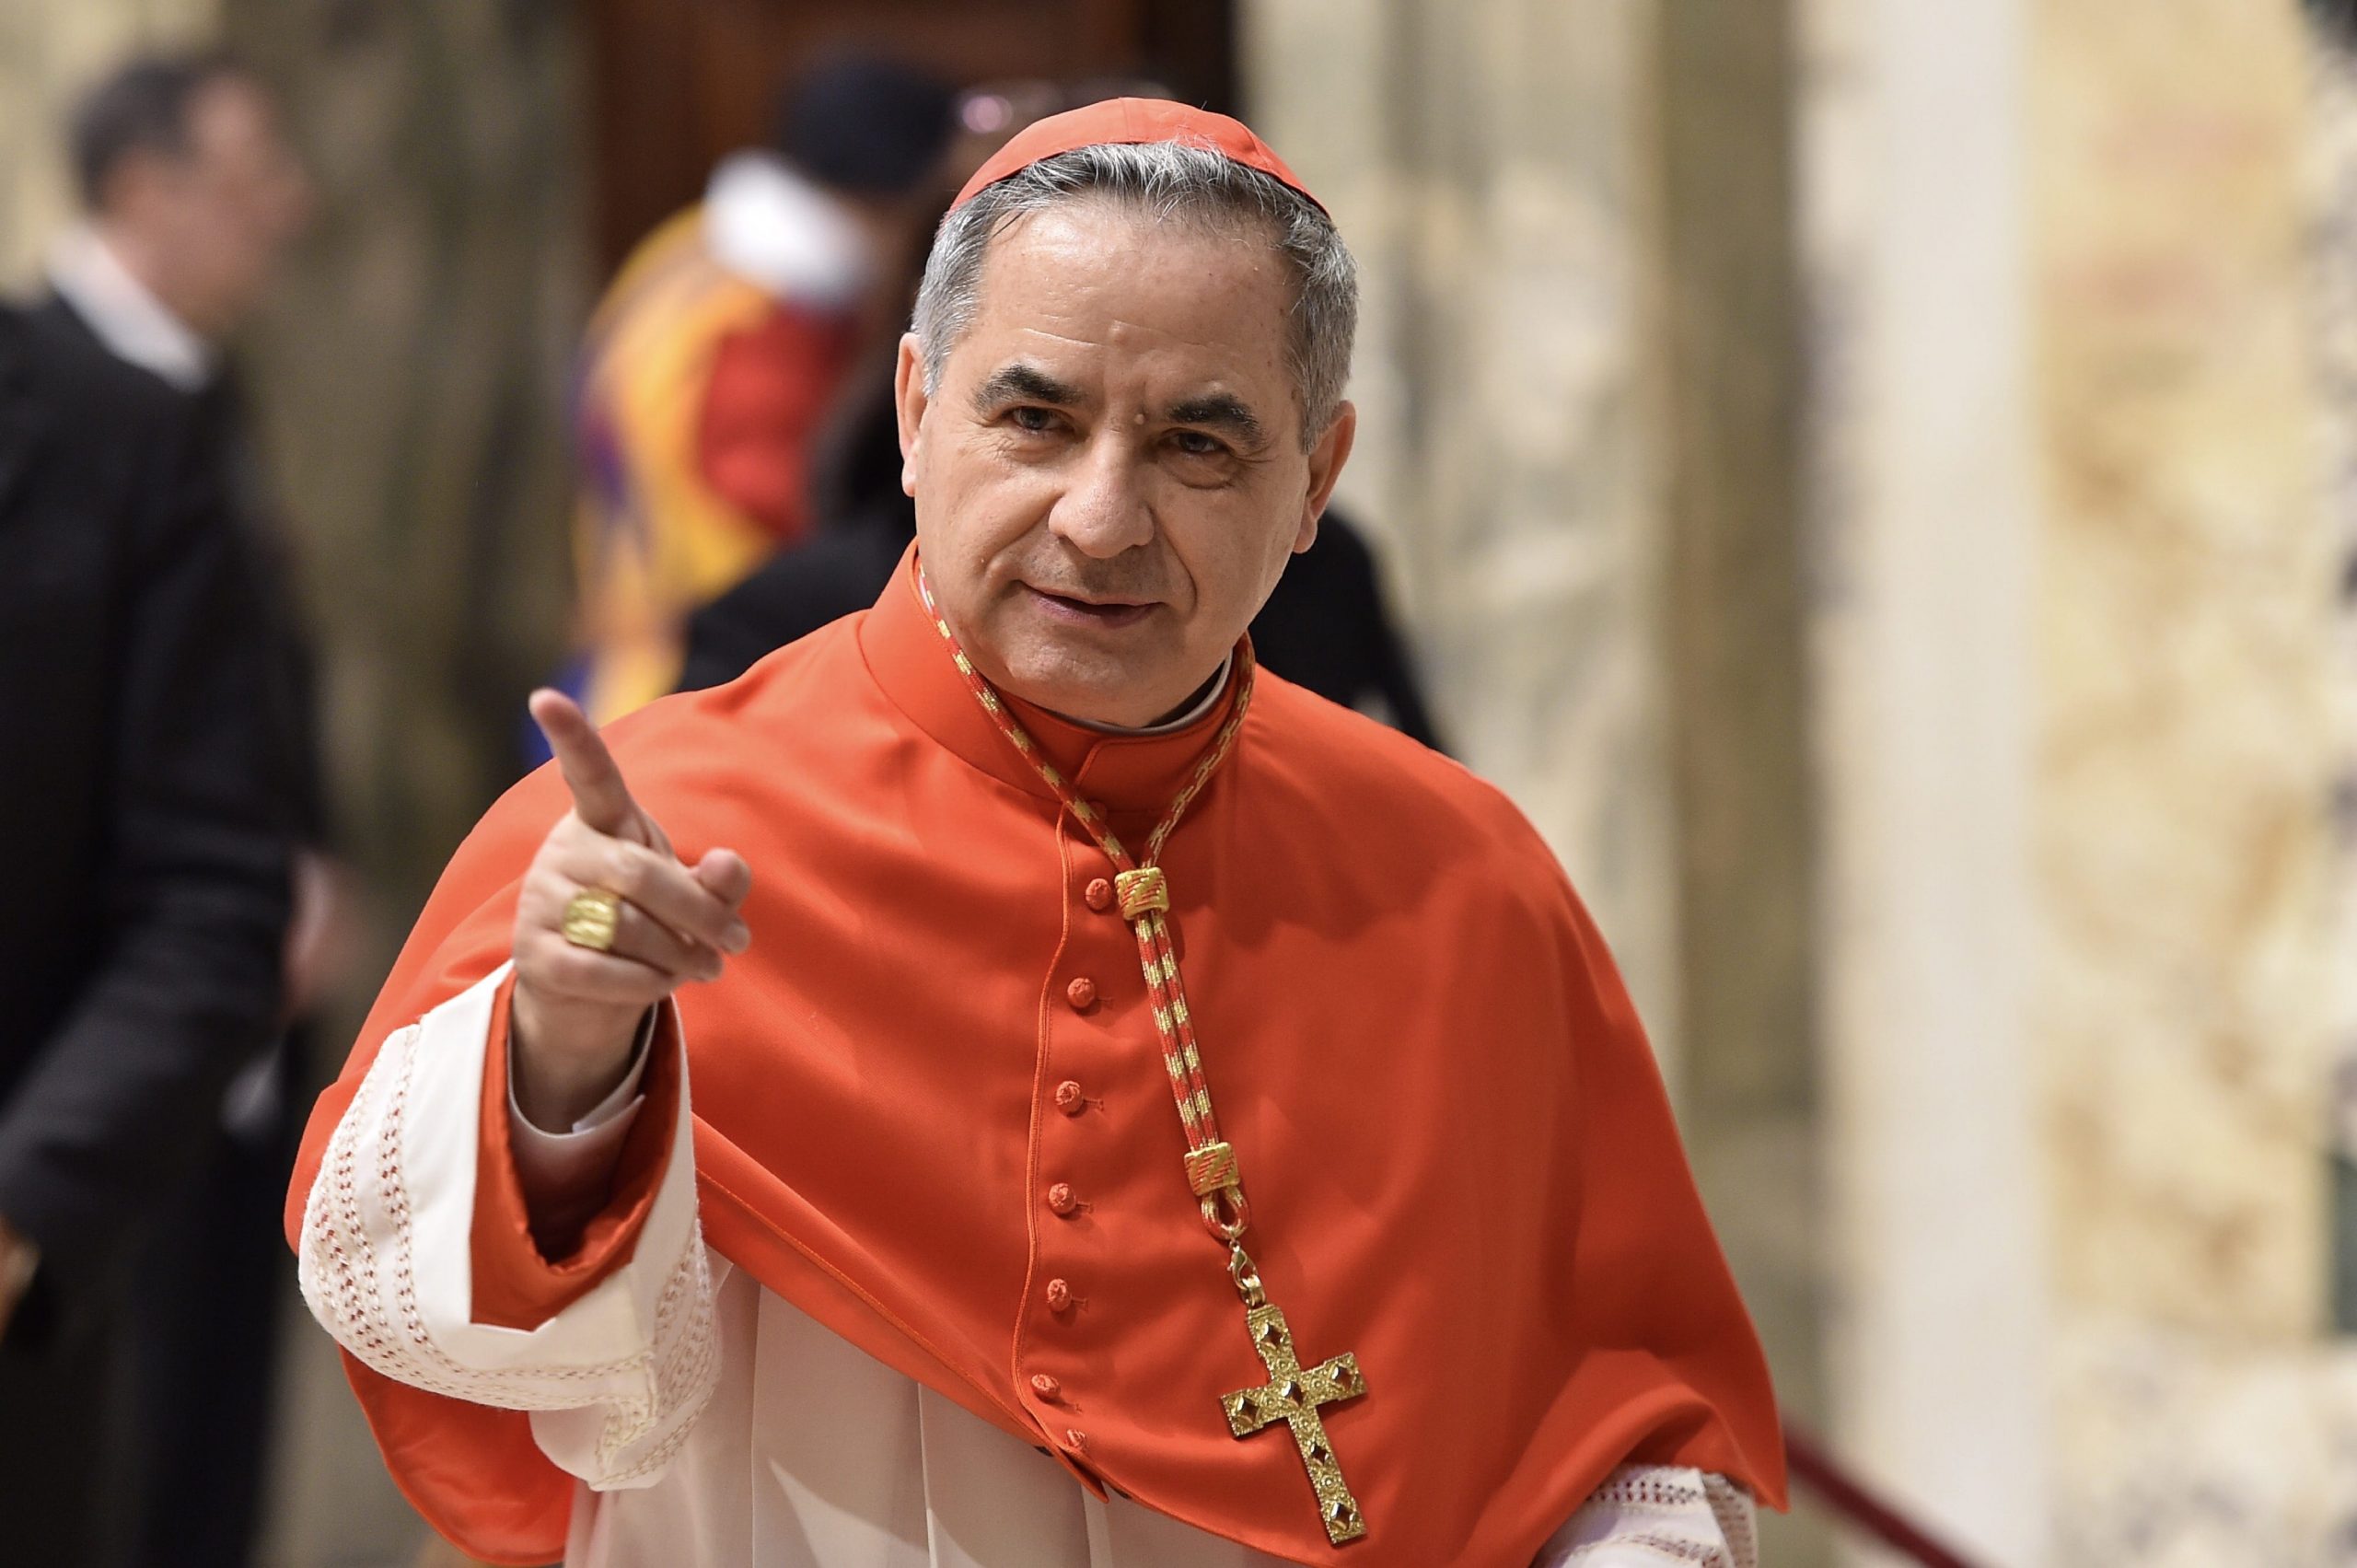 Cardinal Giovanni Angelo Becciu at an official ceremony.